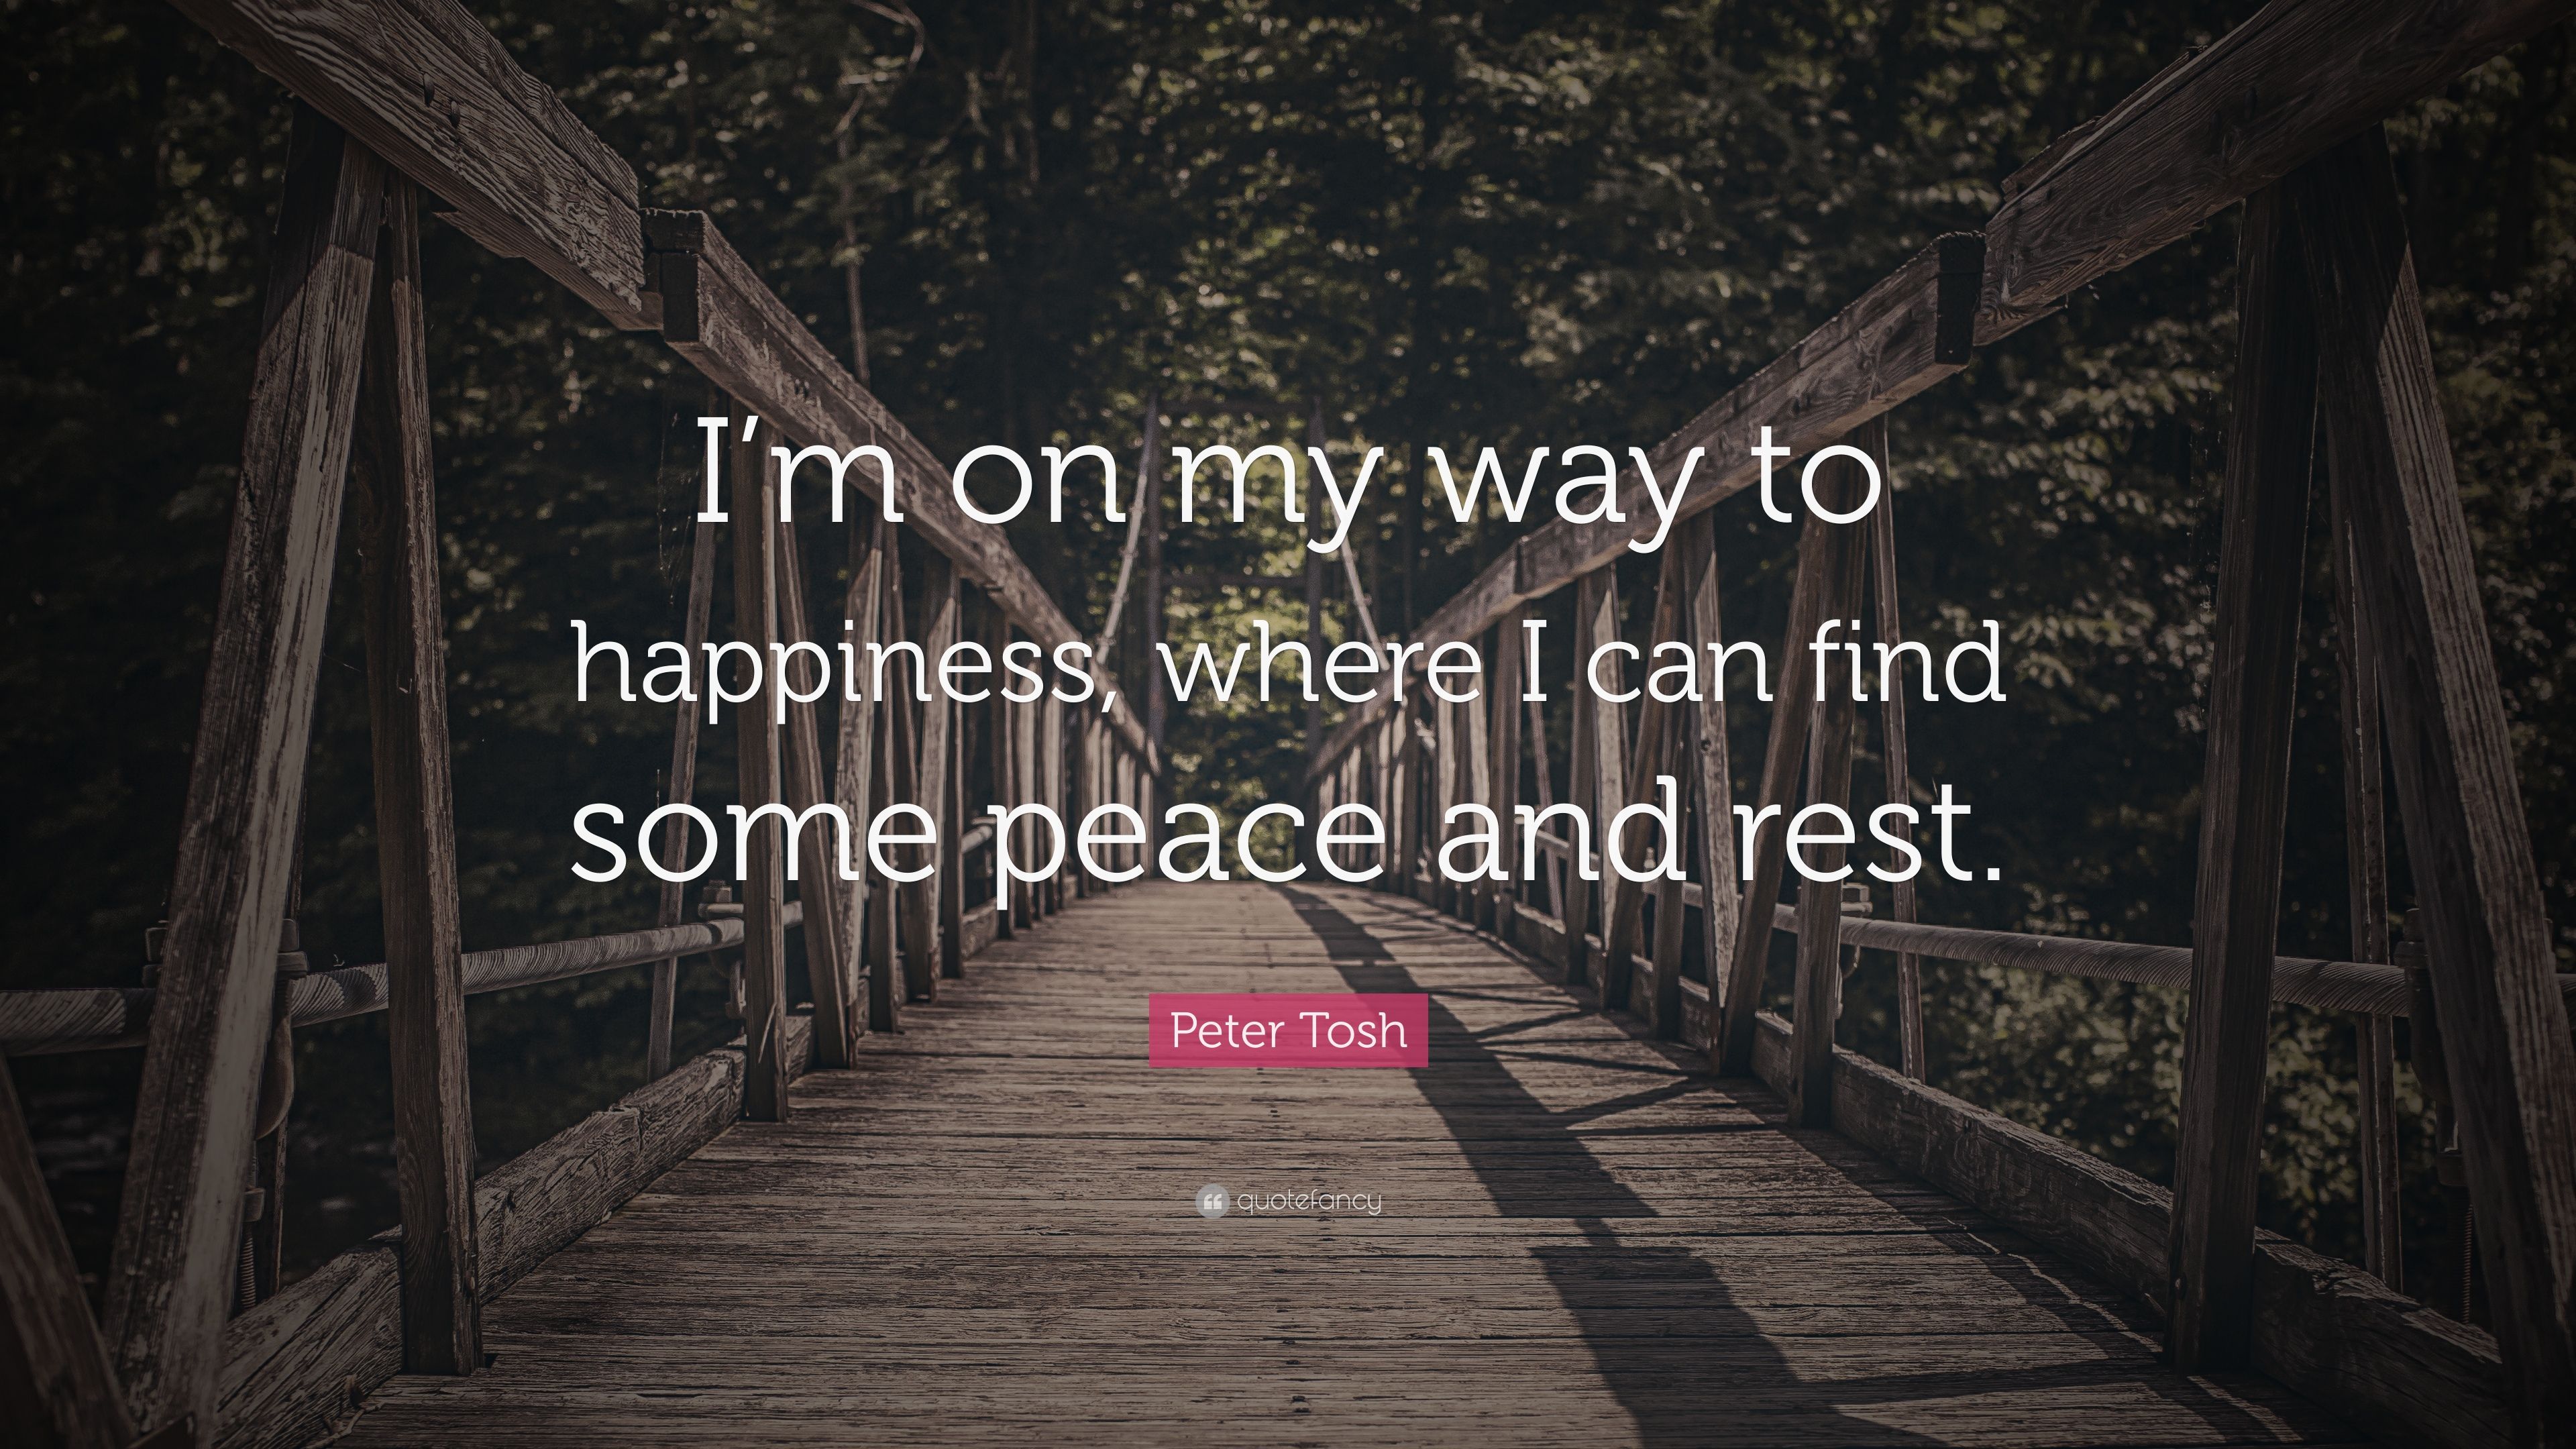 Peter Tosh Quote: “I'm on my way to happiness, where I can find some